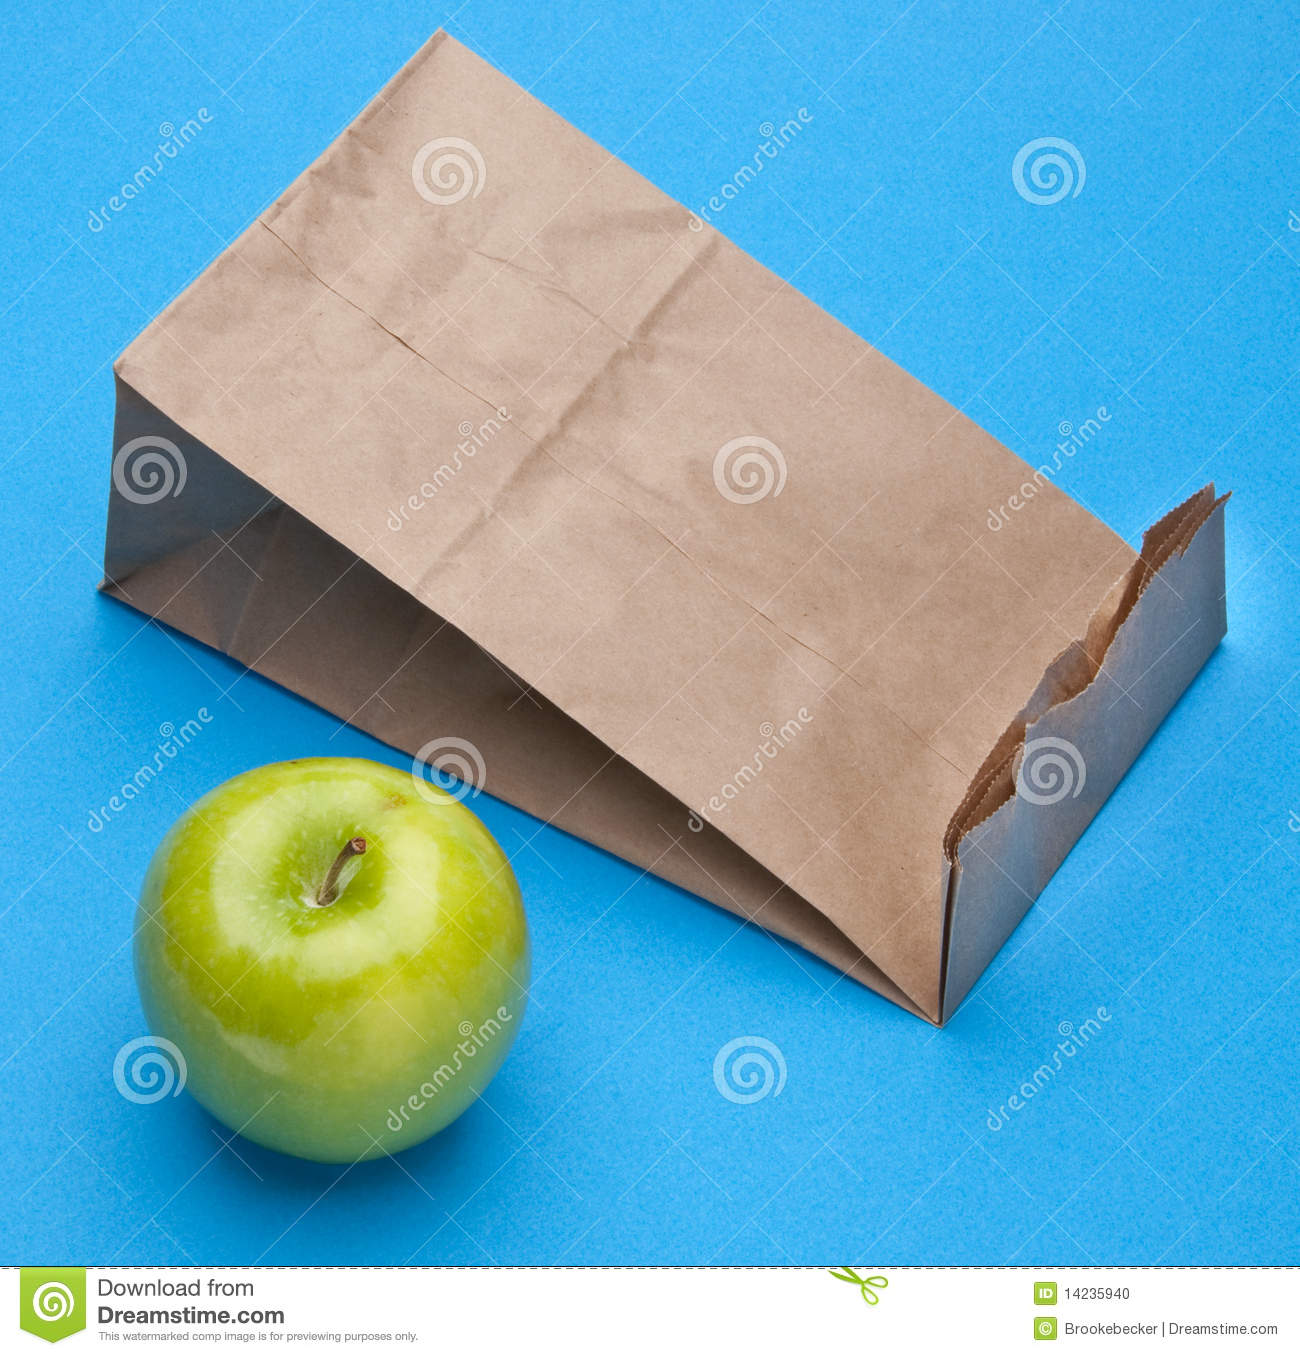 Healthy School Lunch Themed Image With Apples And A Brown Bag 